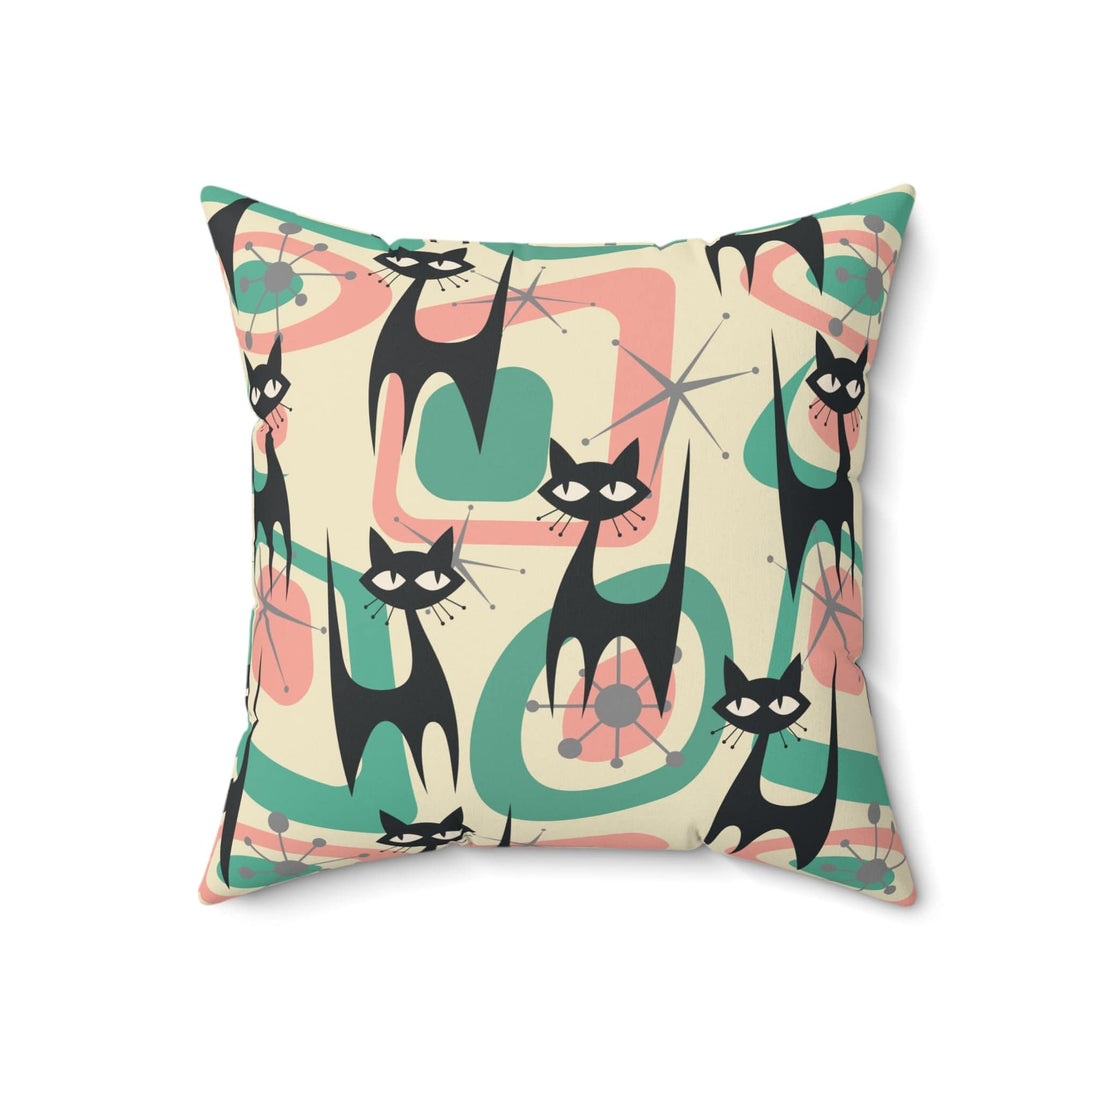 Kate McEnroe New York Atomic Cat Mid Century Modern Starburst Throw Pillow with Insert, 60s Retro Geometric Pink, Mint, Gray Living Room, Bedroom Decor Throw Pillows 18&quot; × 18&quot; 26464894211555108194